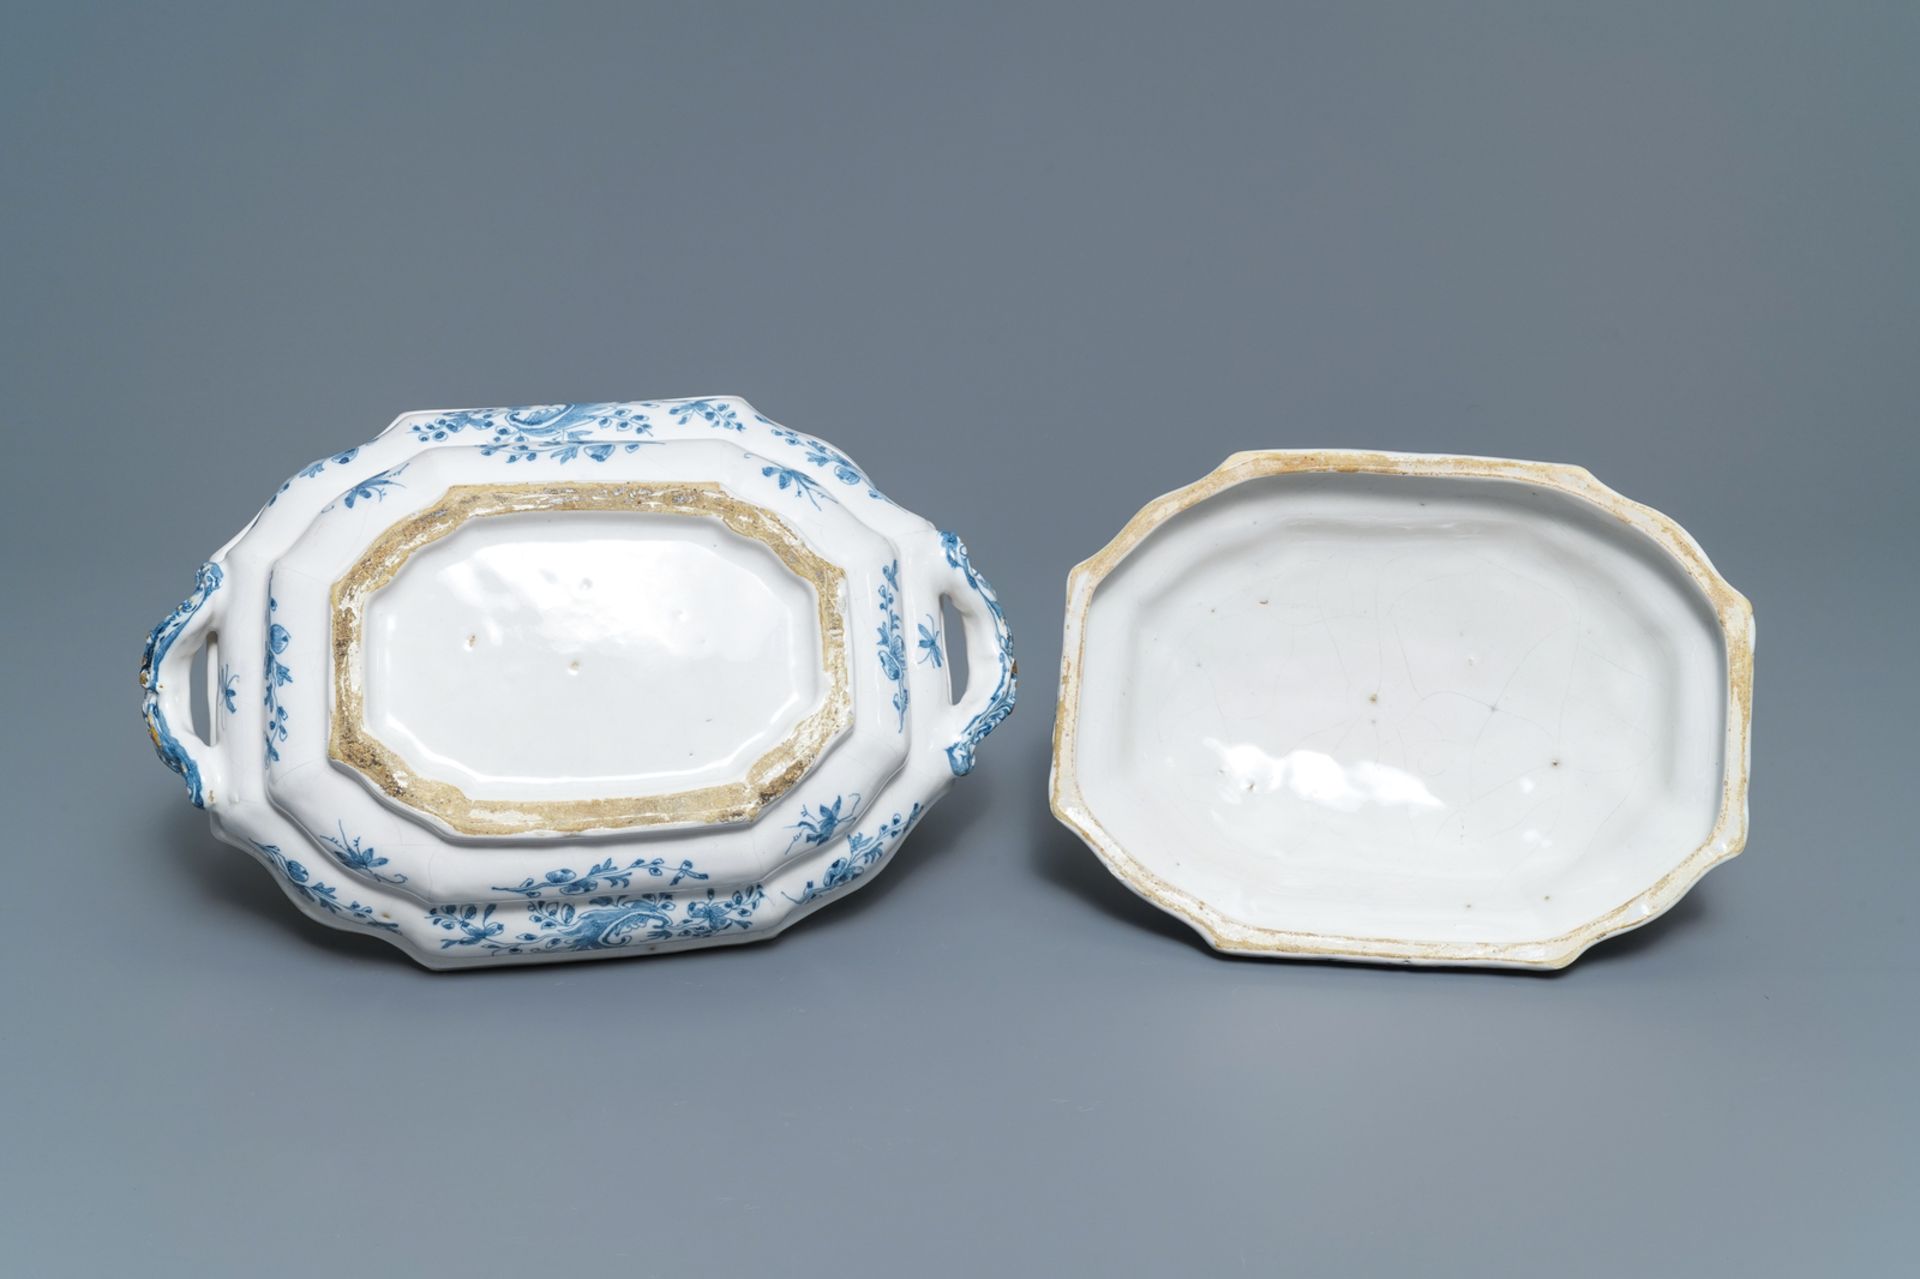 A blue and white Brussels faience tureen and cover, 18th C. - Image 7 of 7